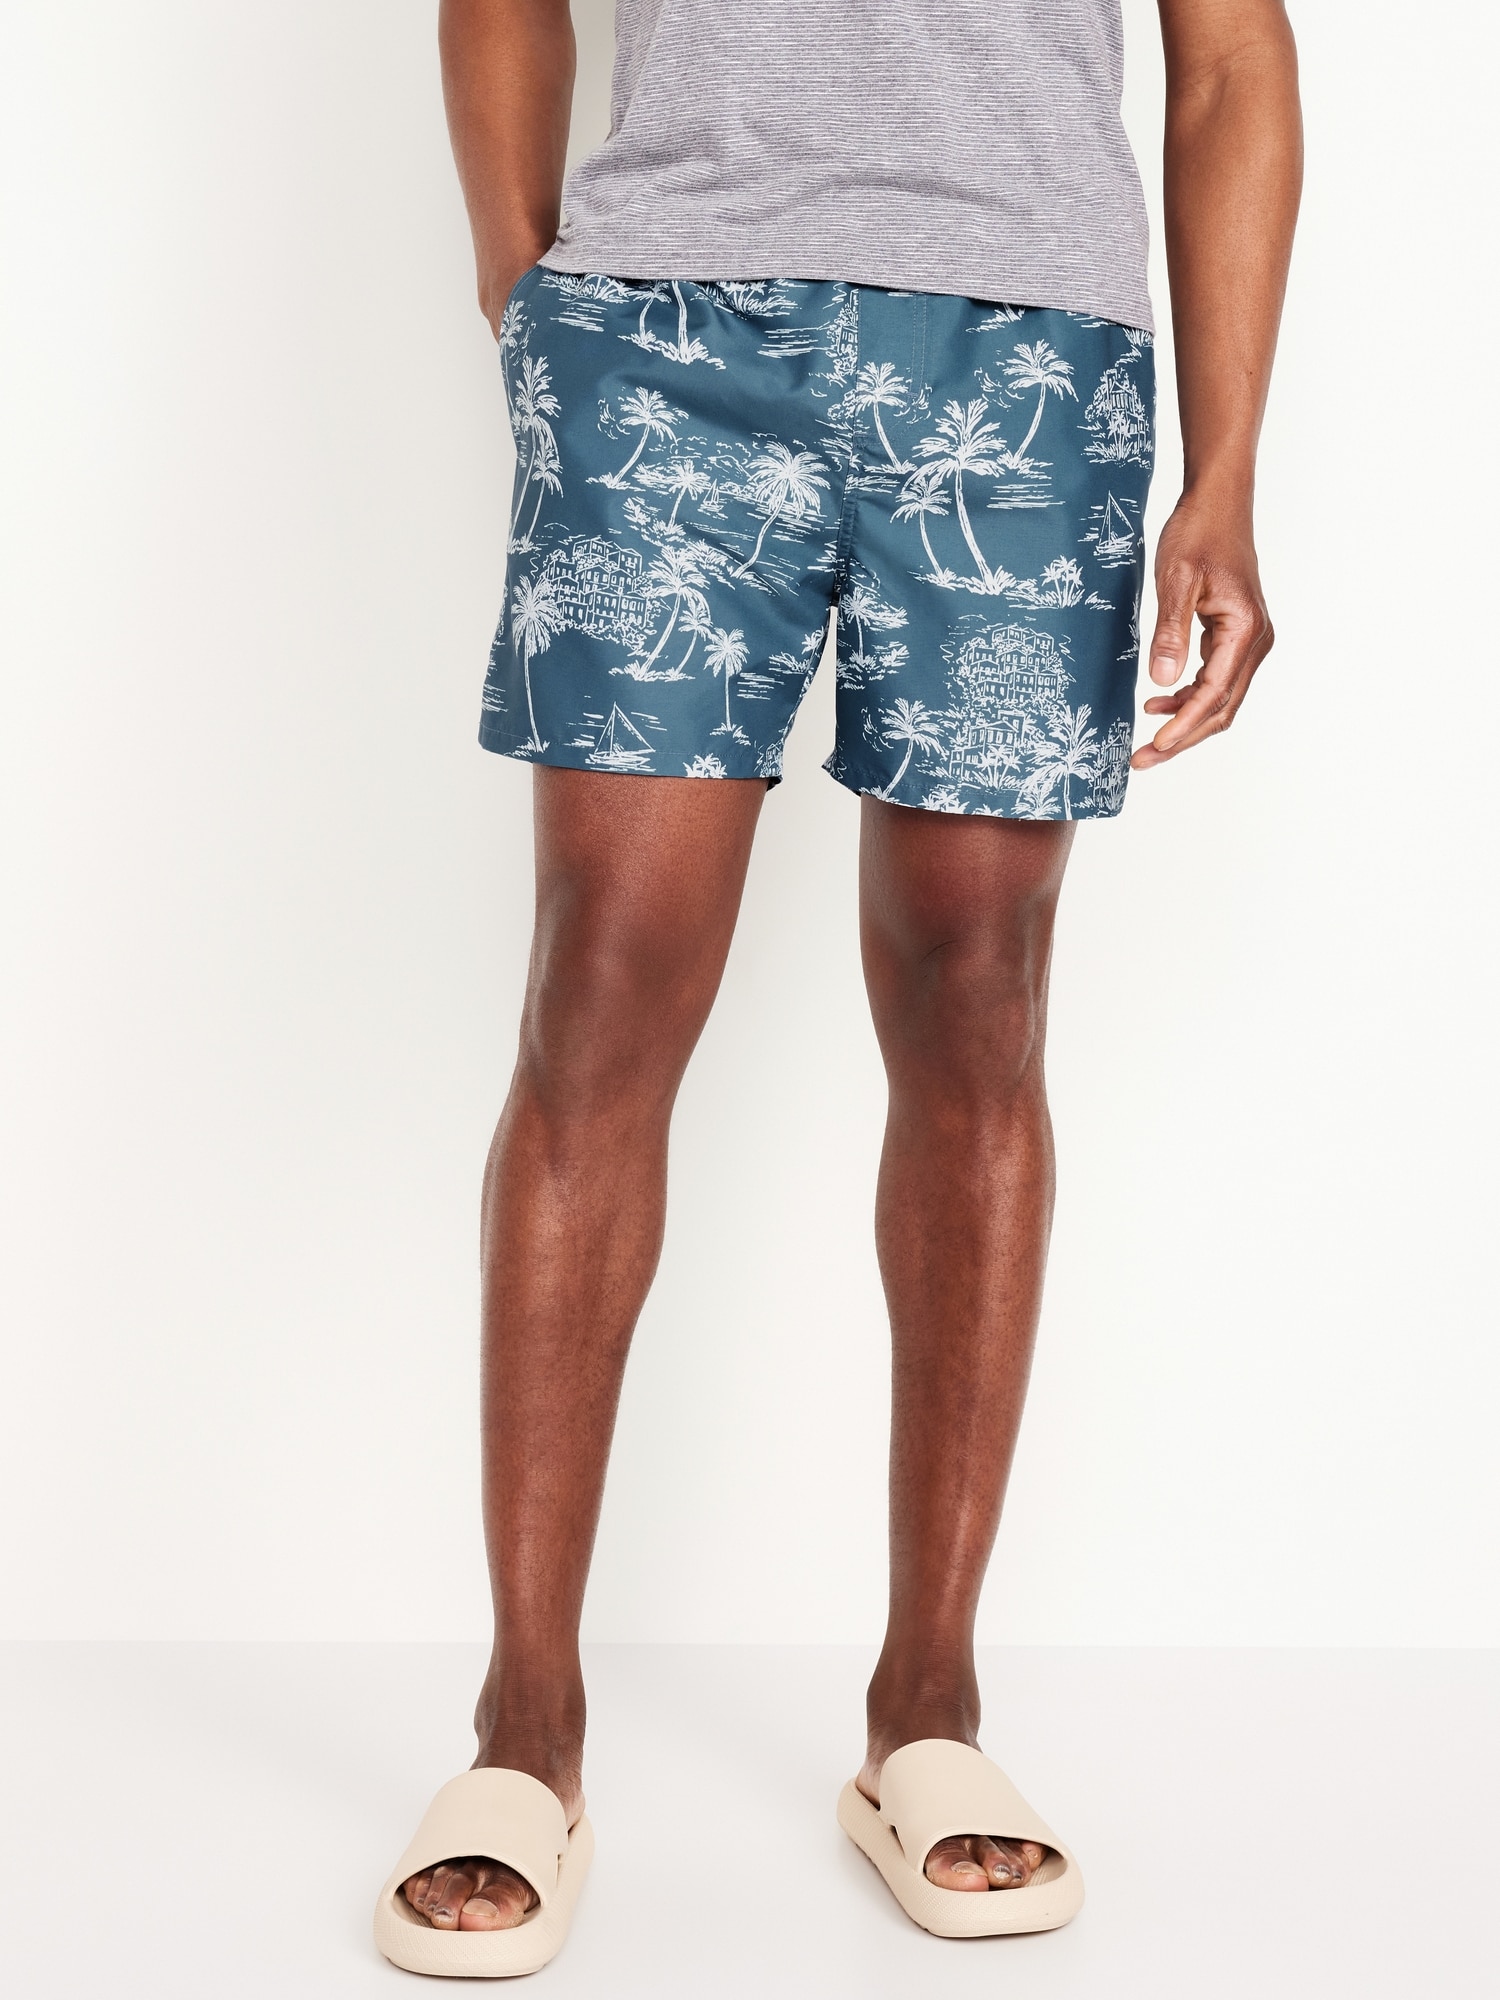 Old Navy Men's Printed Swim Trunks -- 5-Inch Inseam - - Tall Size L